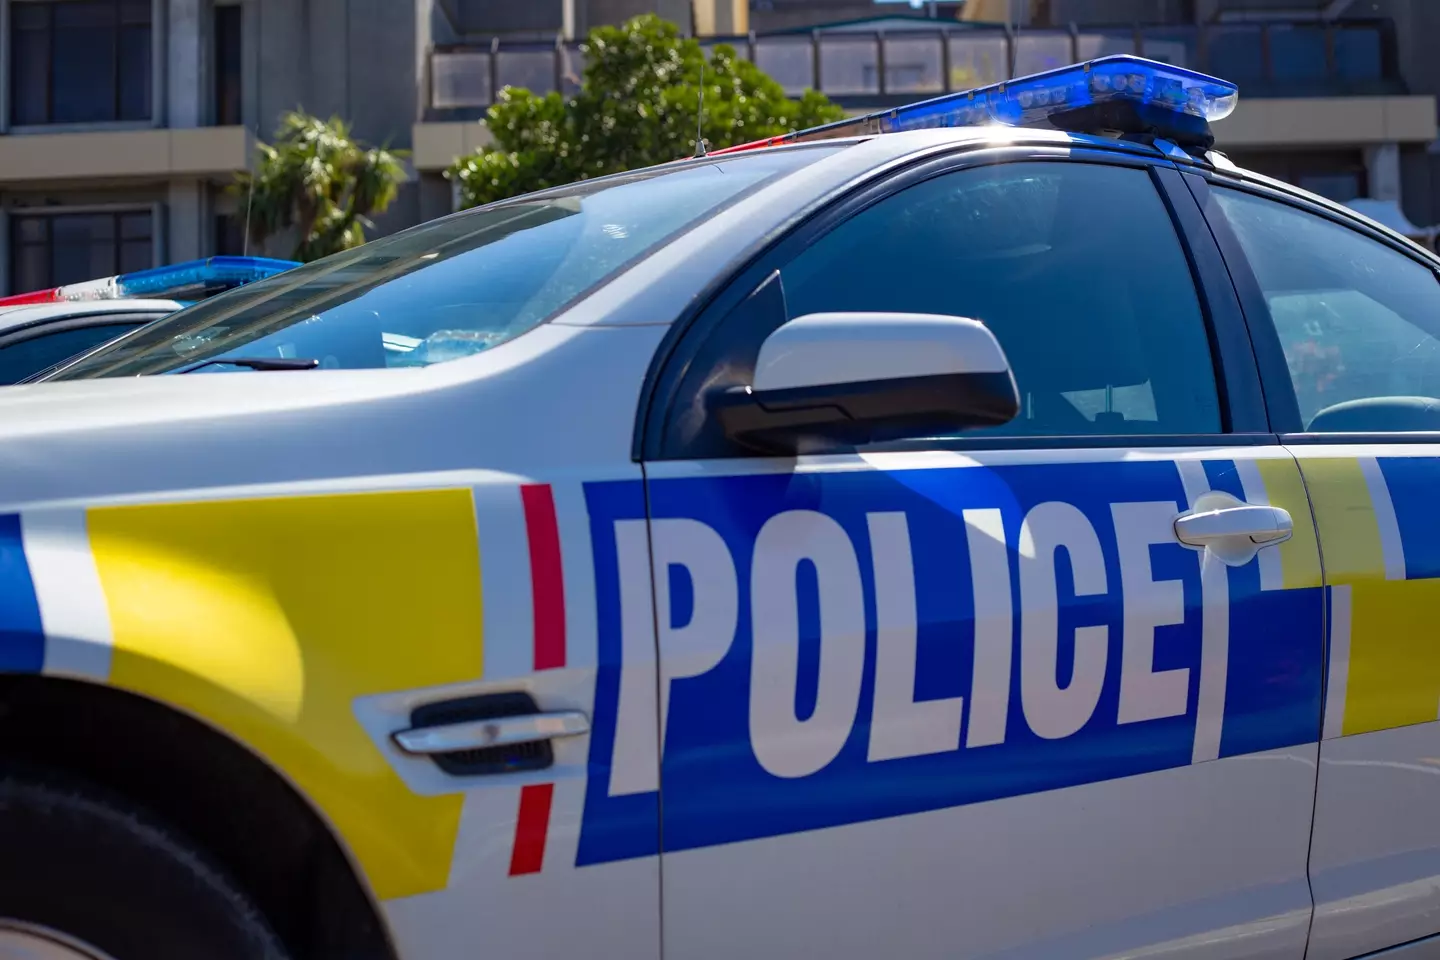 The family's car collided with a semi-trailer on the South Island.